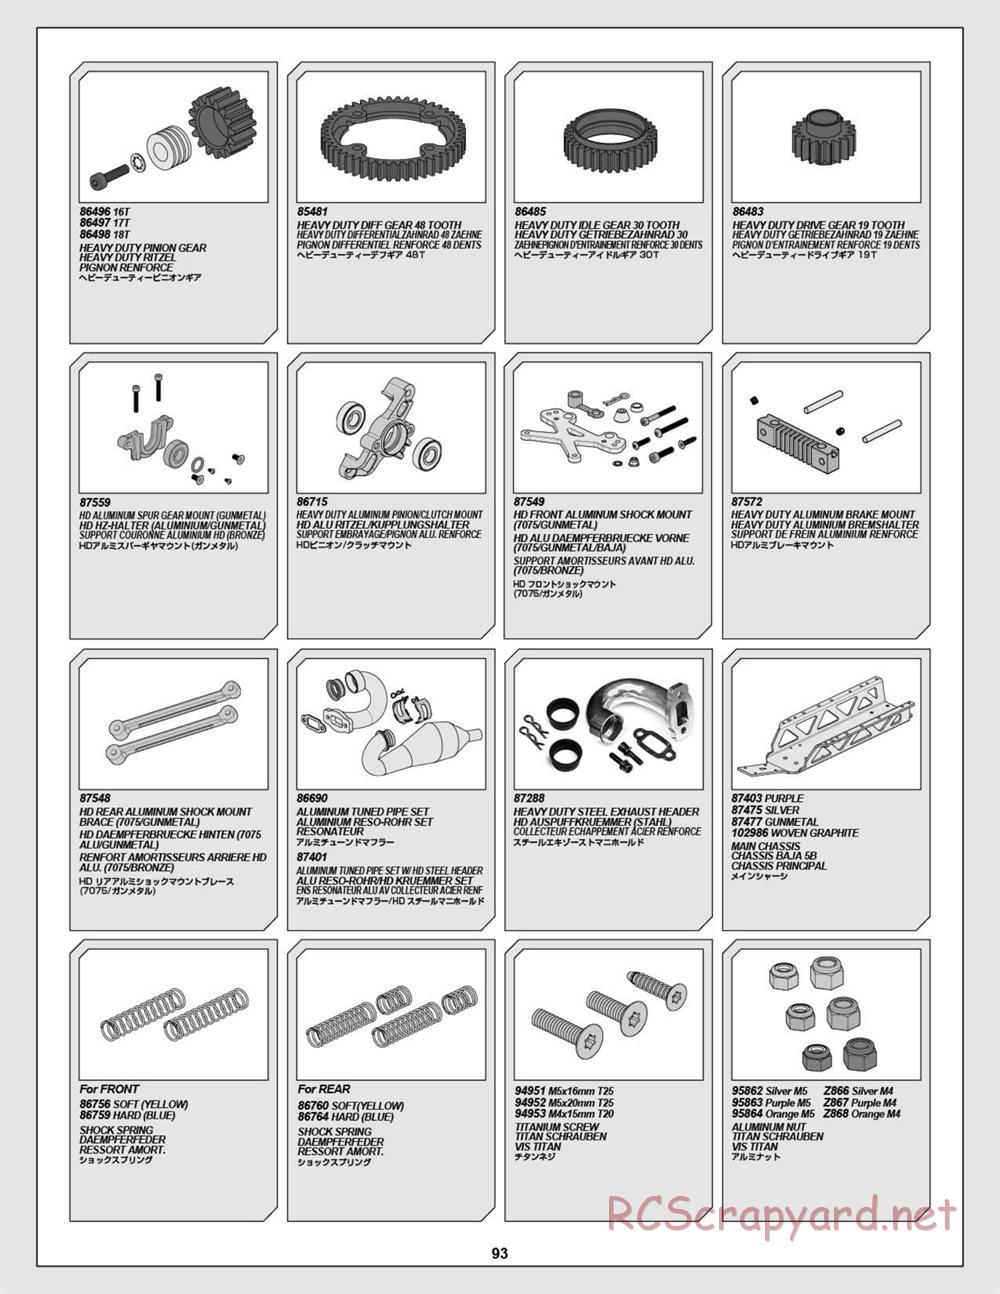 HPI - Baja 5T - Exploded View - Page 93